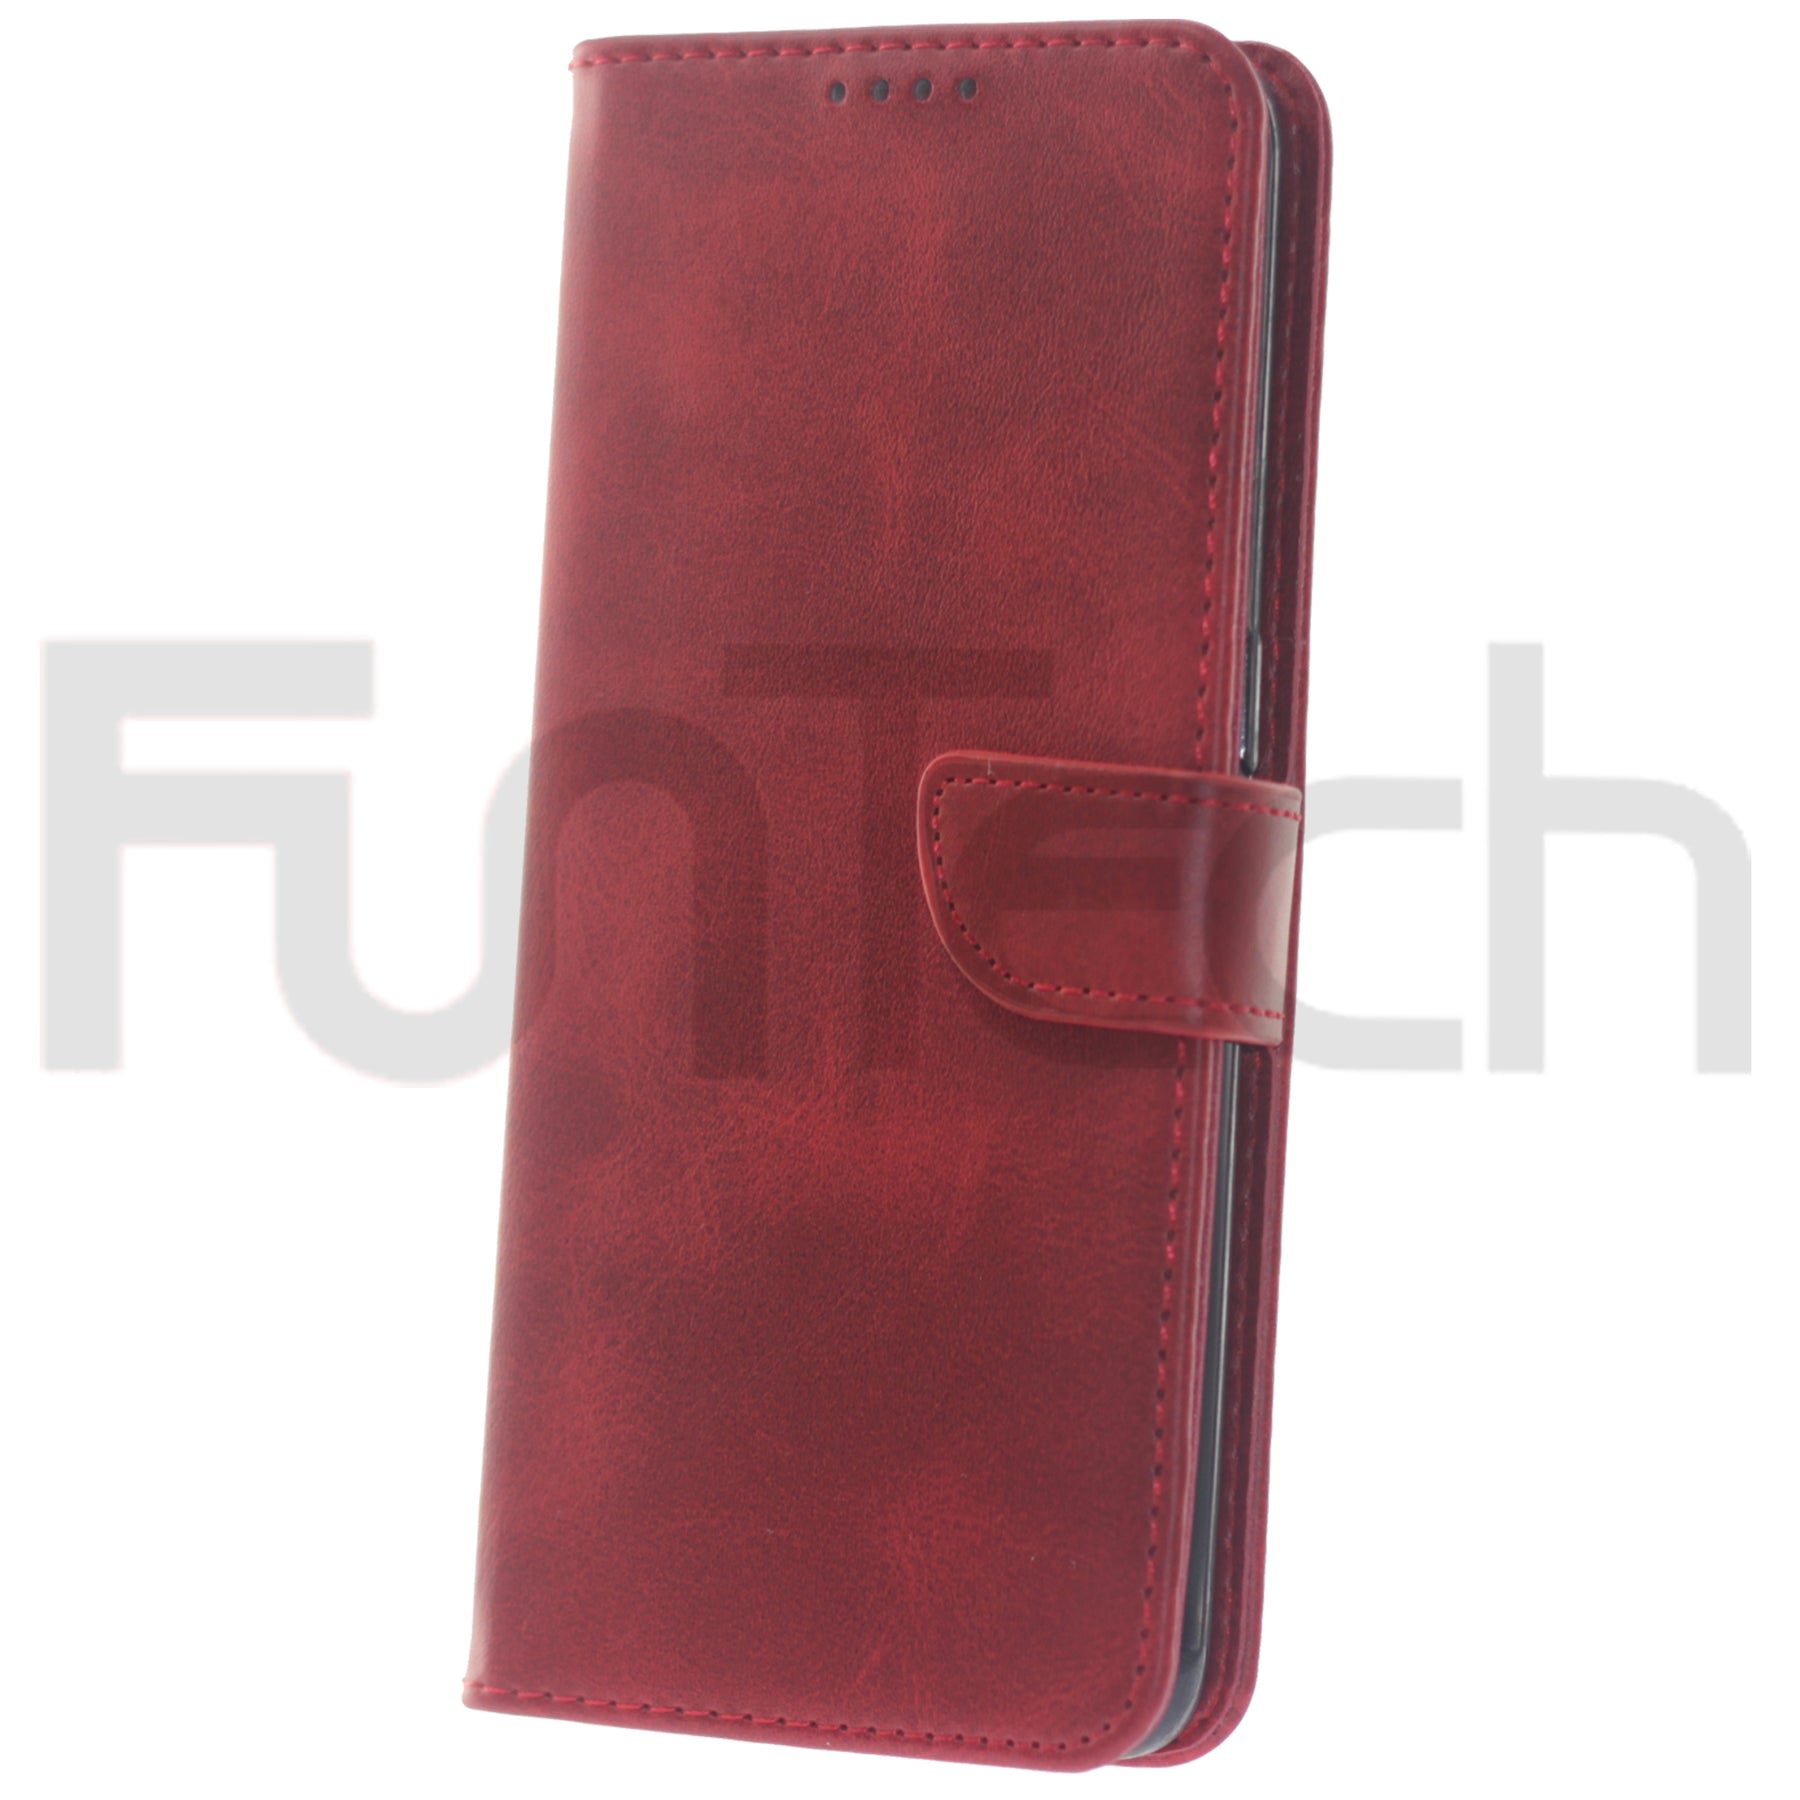 Nord CE 5G Lite, Leather Wallet Case,